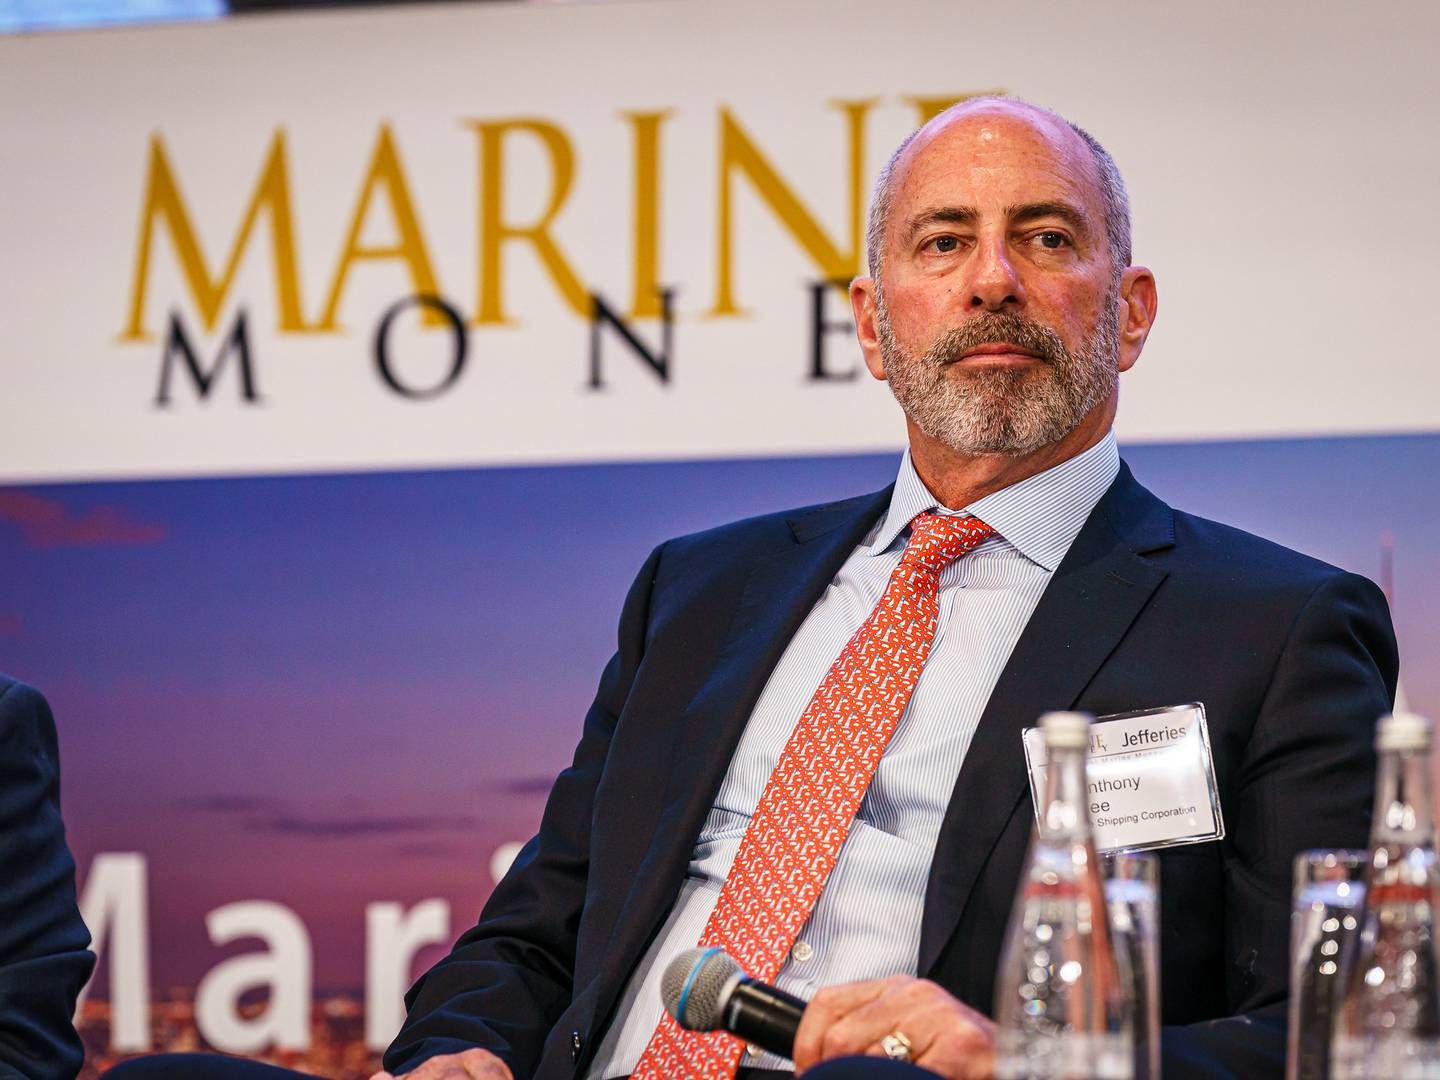 Anthony Gurnee will continue as chief executive of Ardmore until September. | Foto: Marine Money